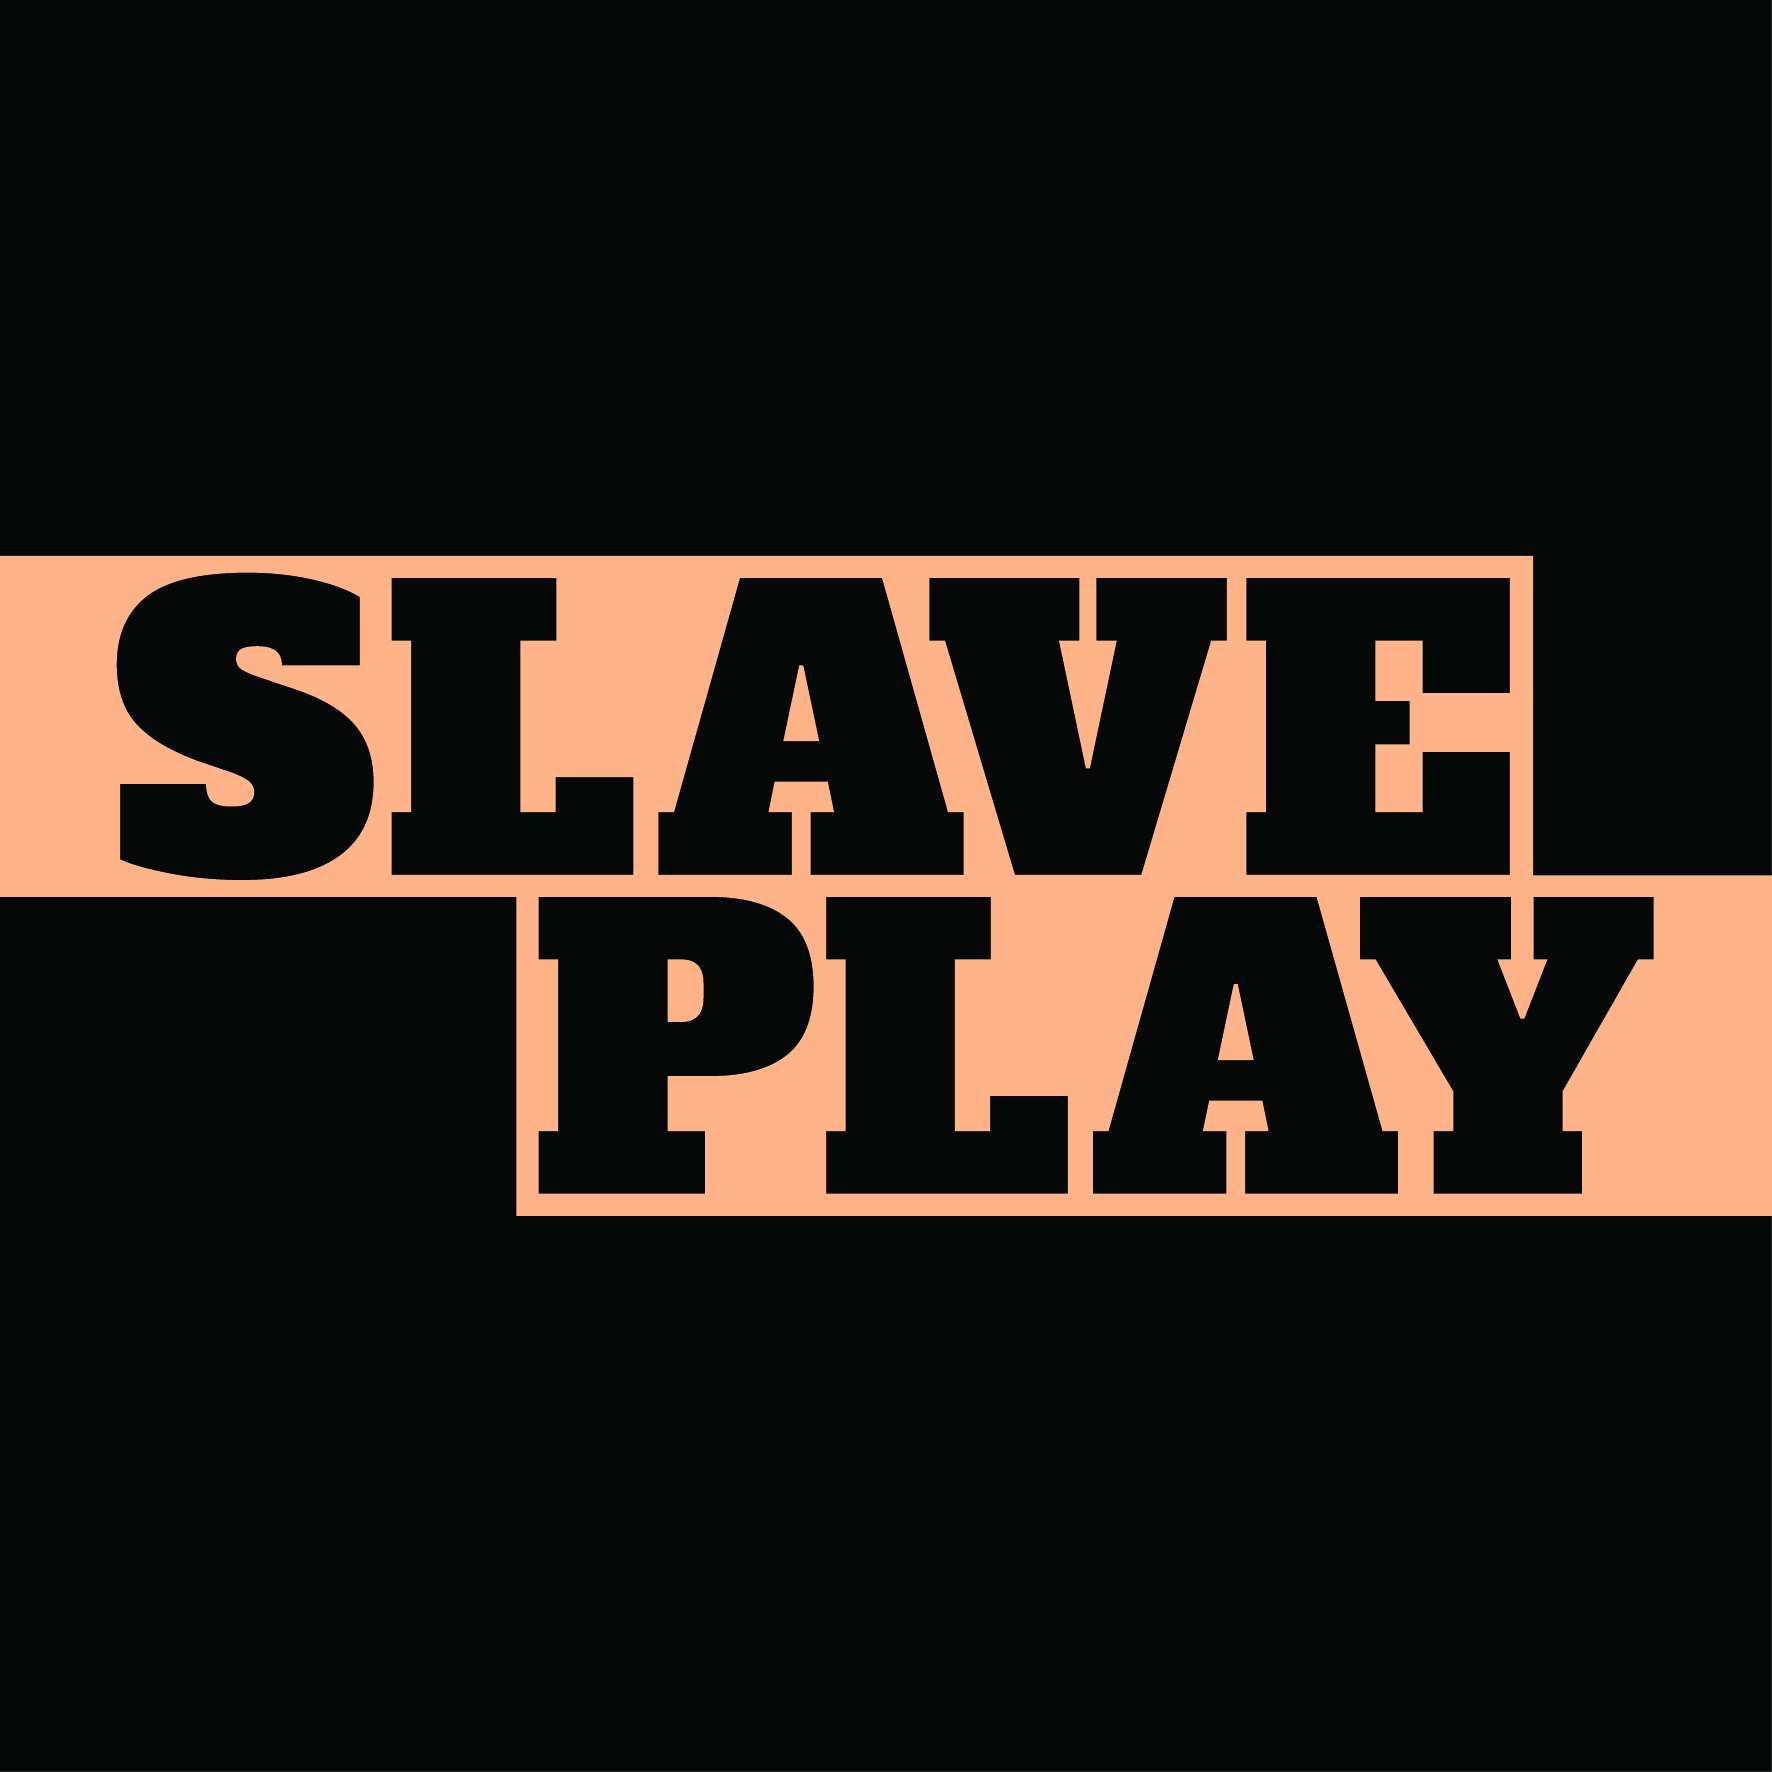 The UK premiere of Slave Play by Jeremy O'Harris - the most Tony-nominated play of all time comes to London